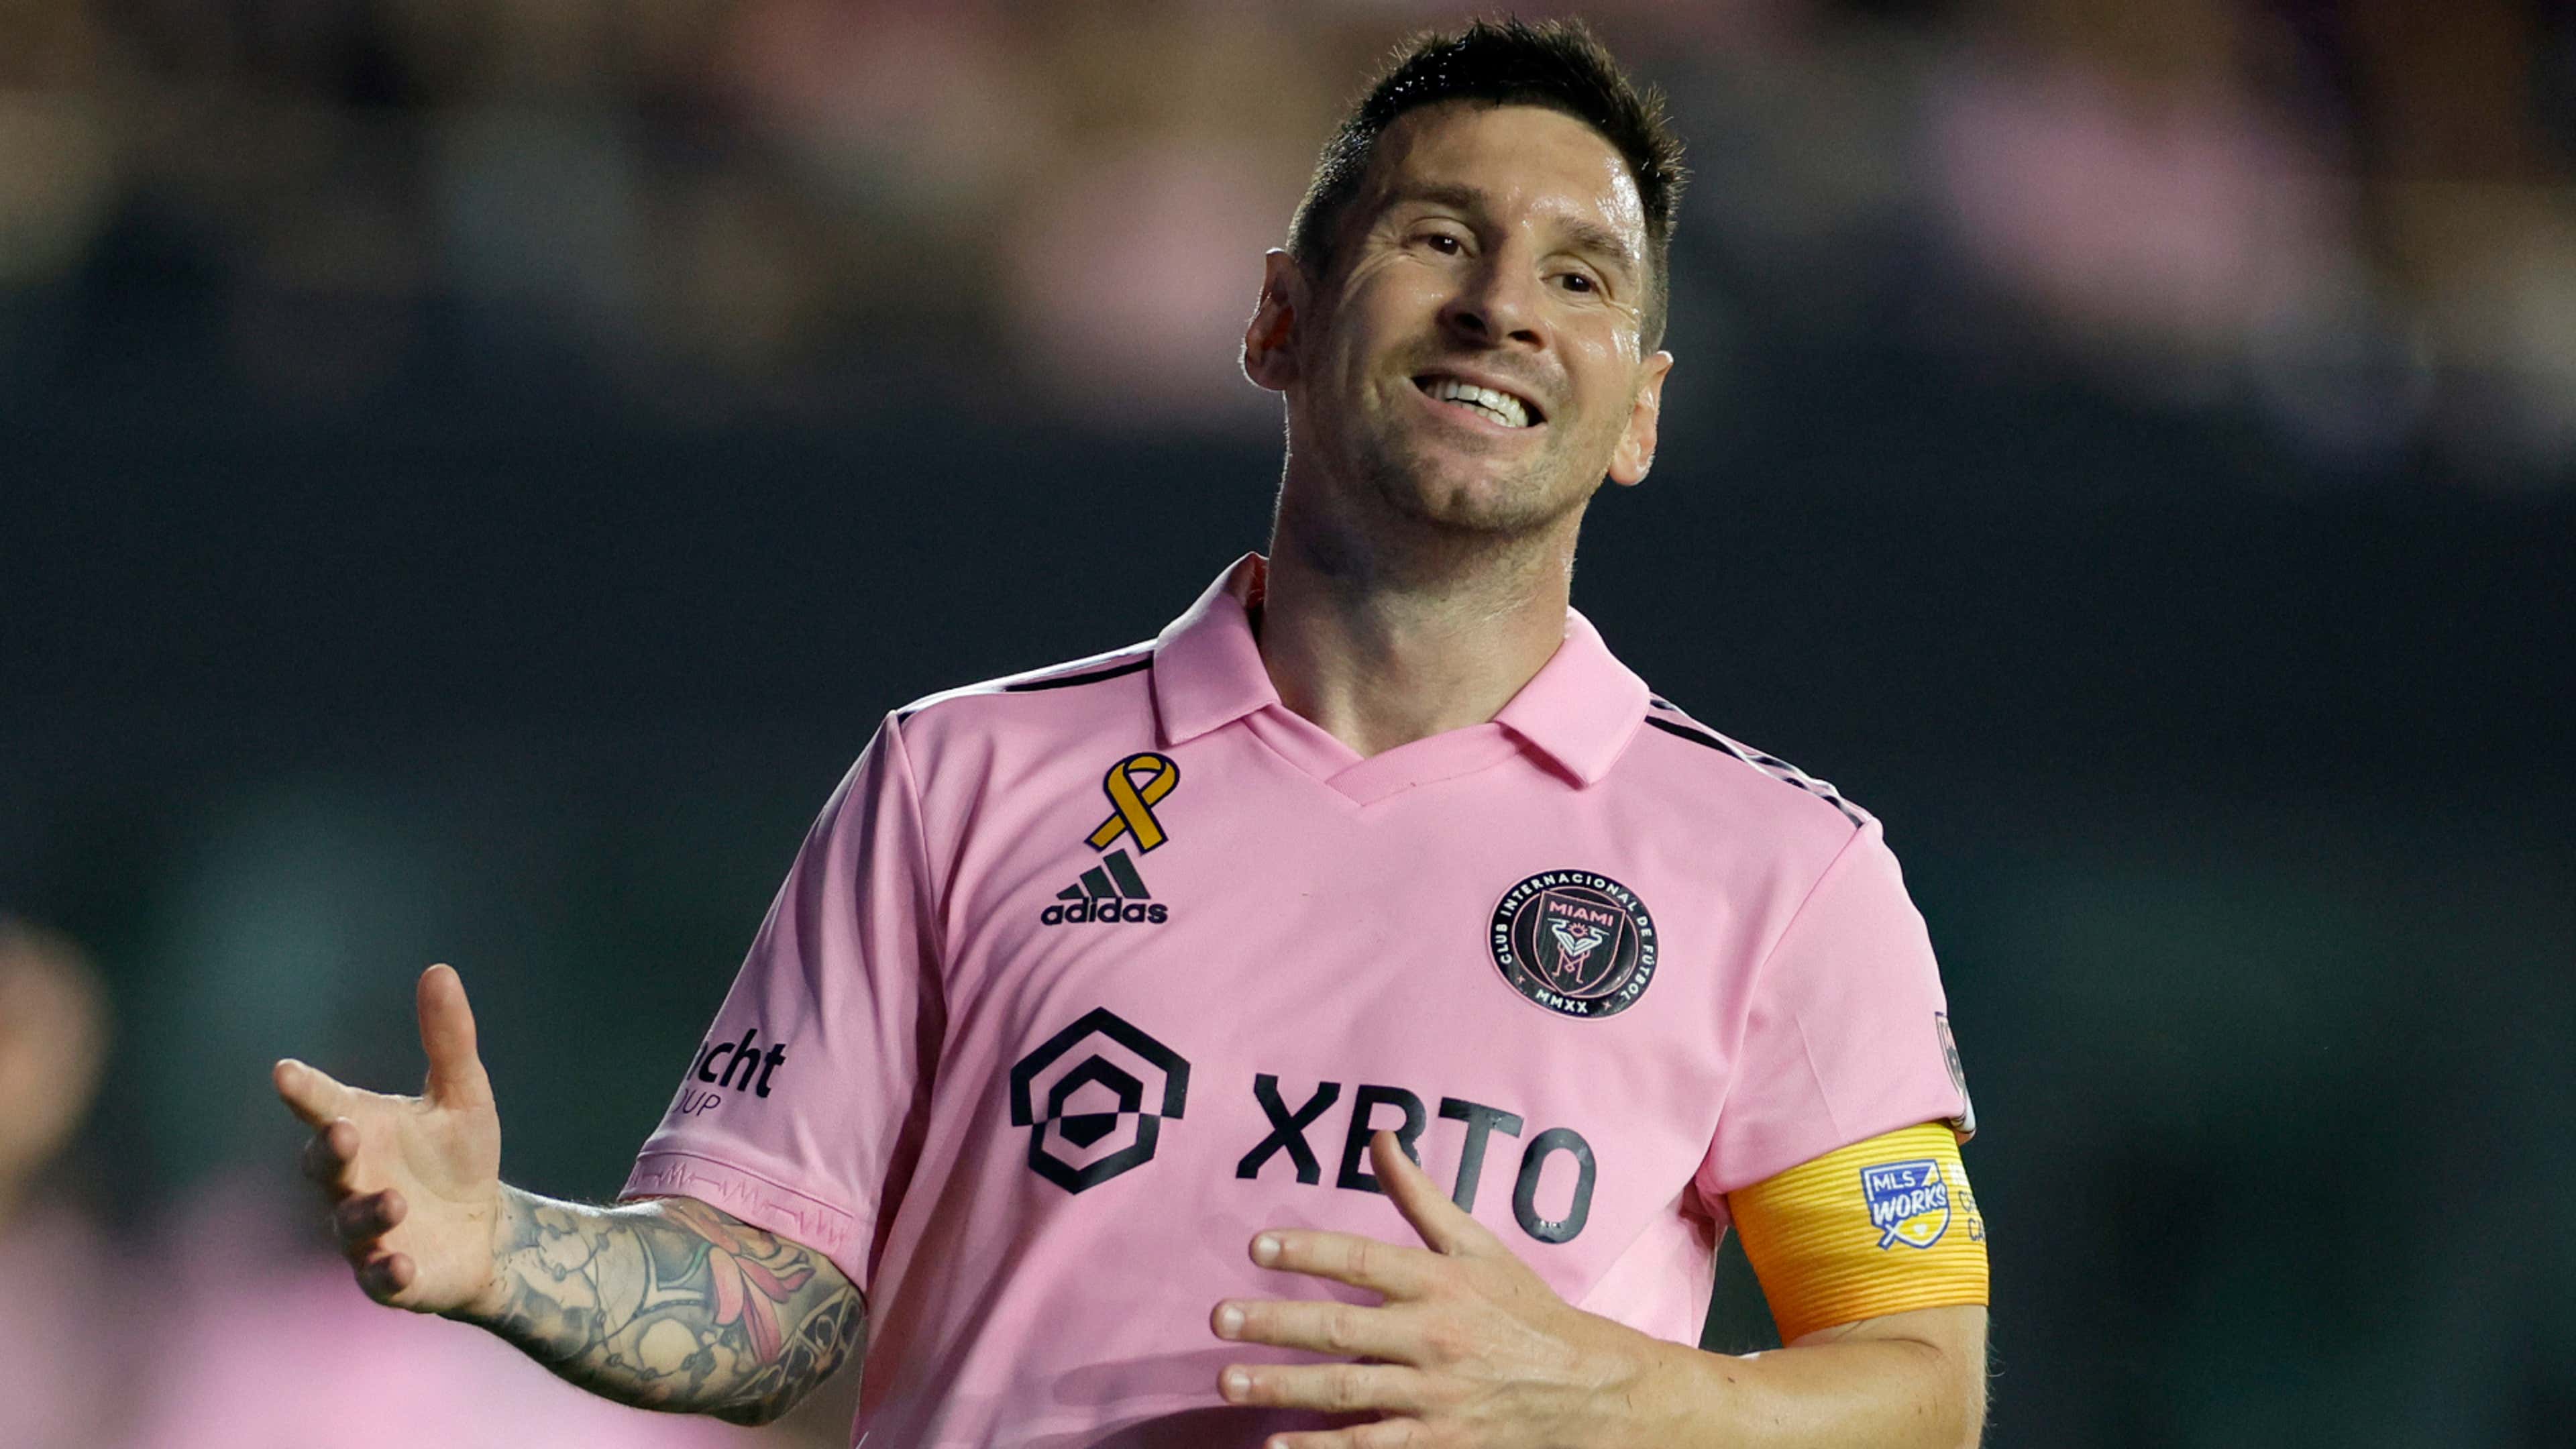 Will Lionel Messi be fit to play for Inter Miami in their next MLS